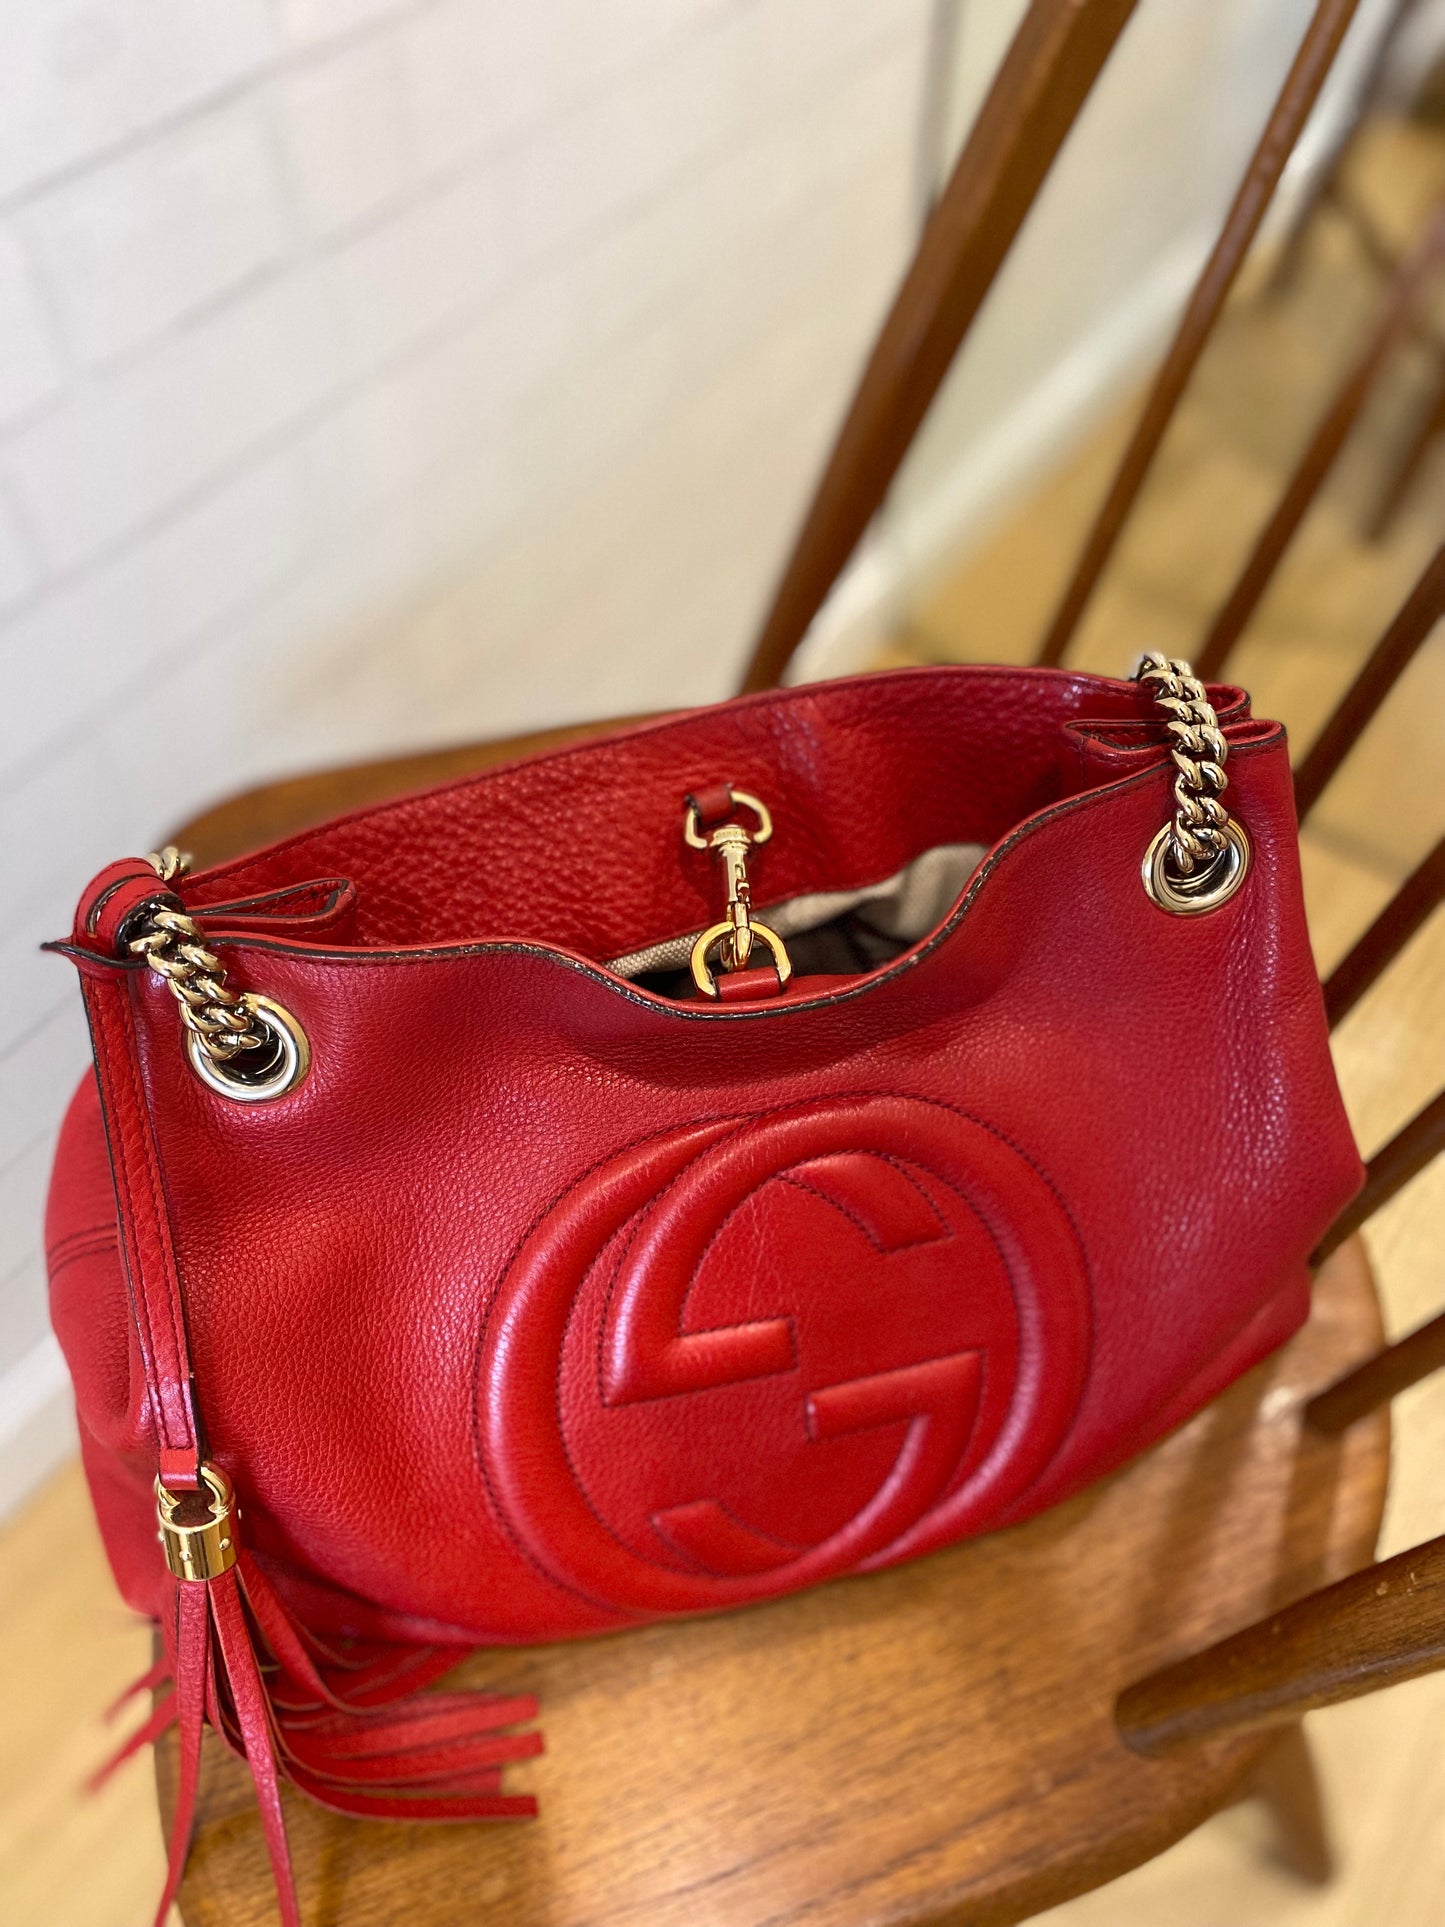 GUCCI Soho Medium Red leather Gold Chain